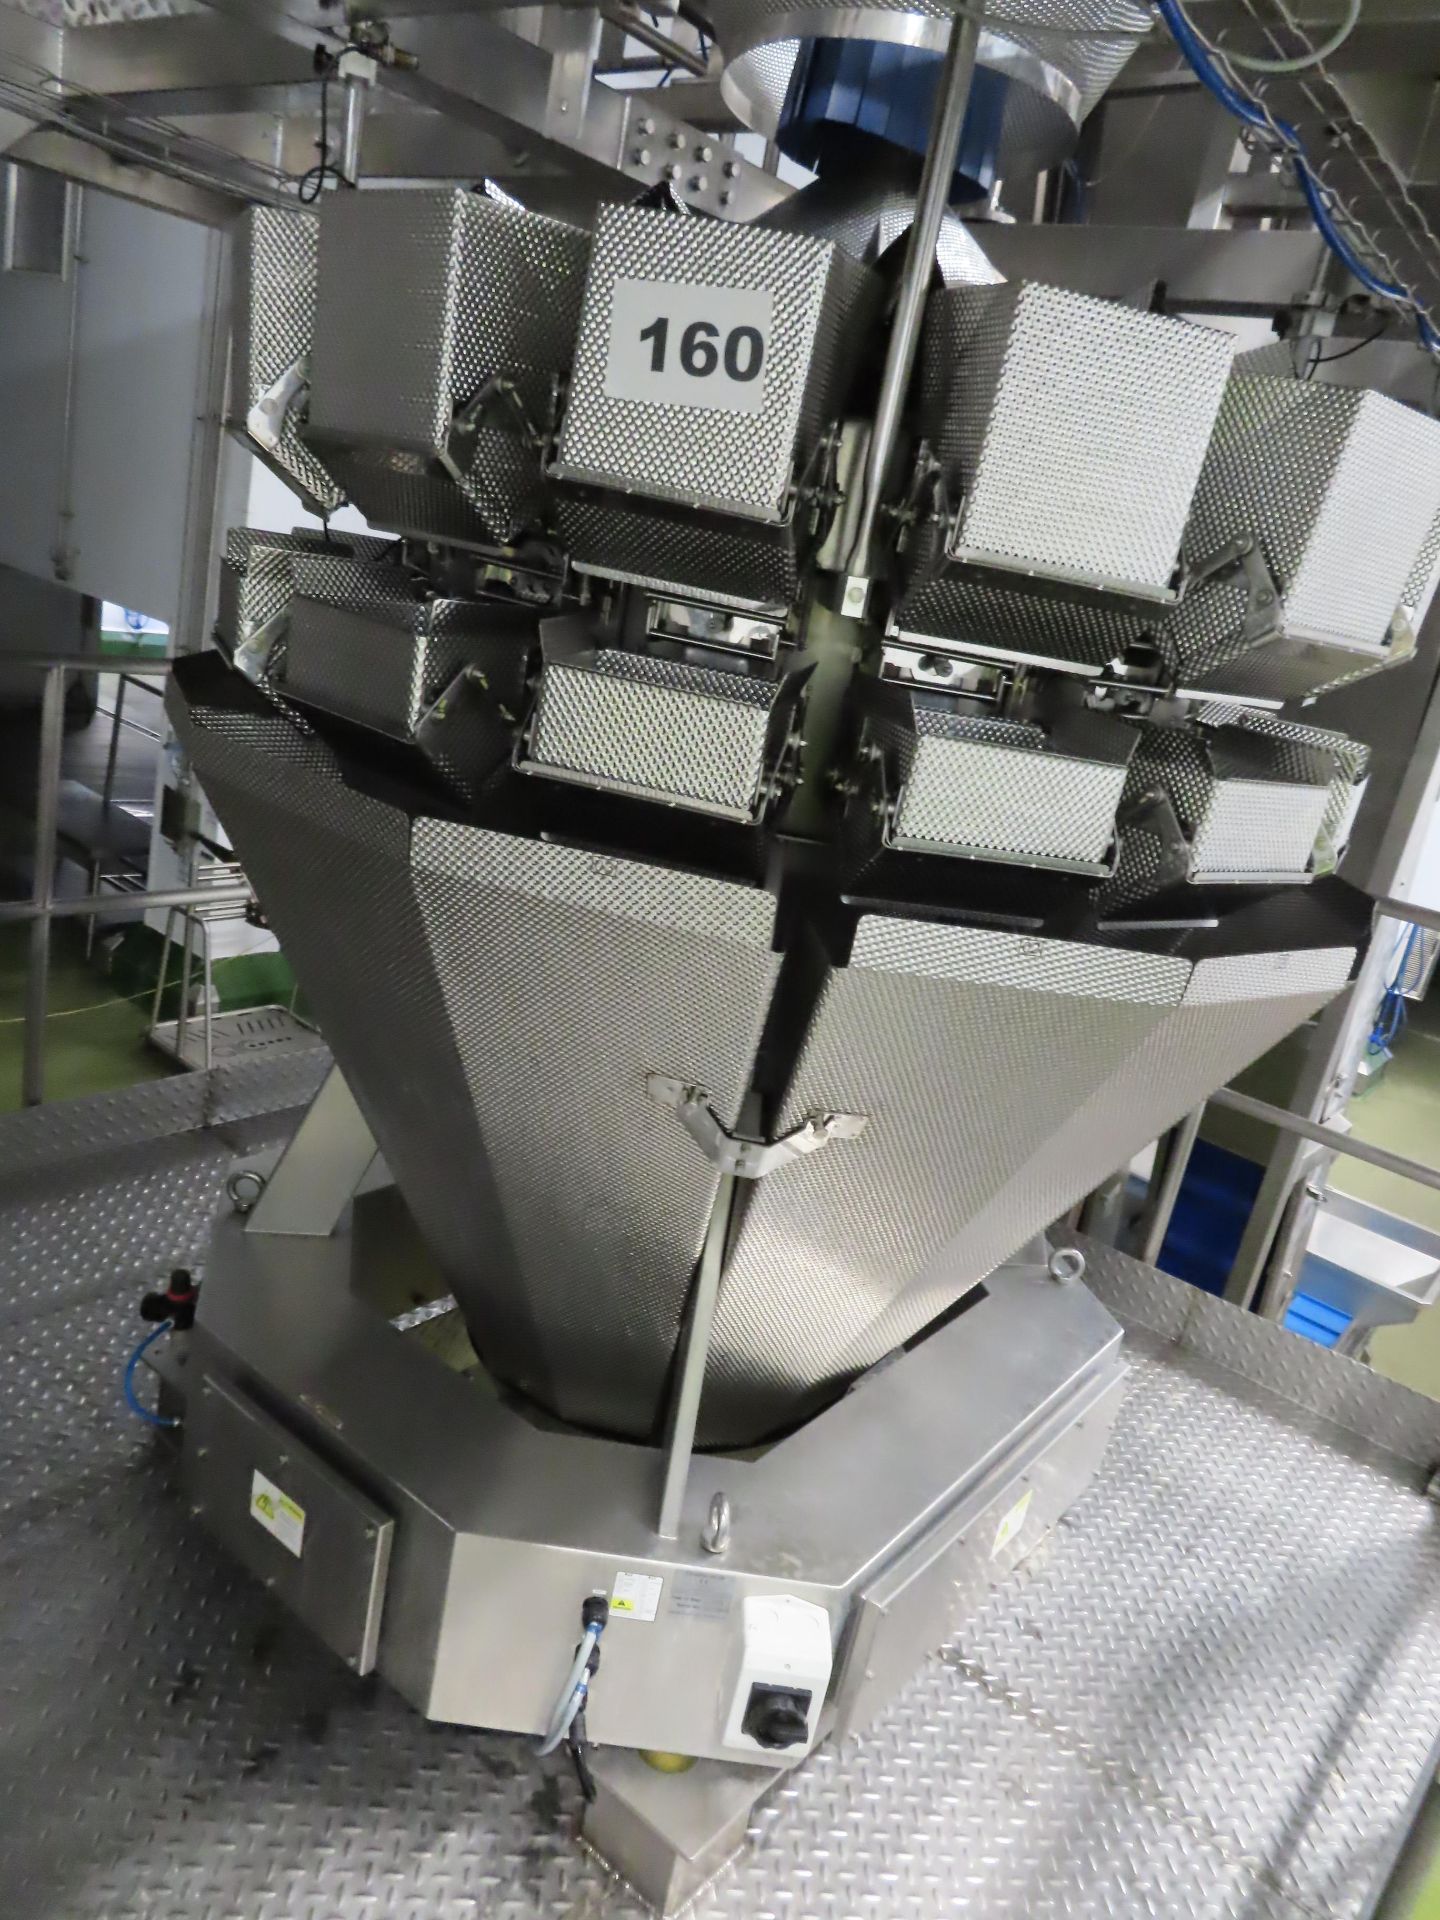 MULTIHEAD WEIGHER. 20-HEAD. YEAR 2018 - Image 6 of 6